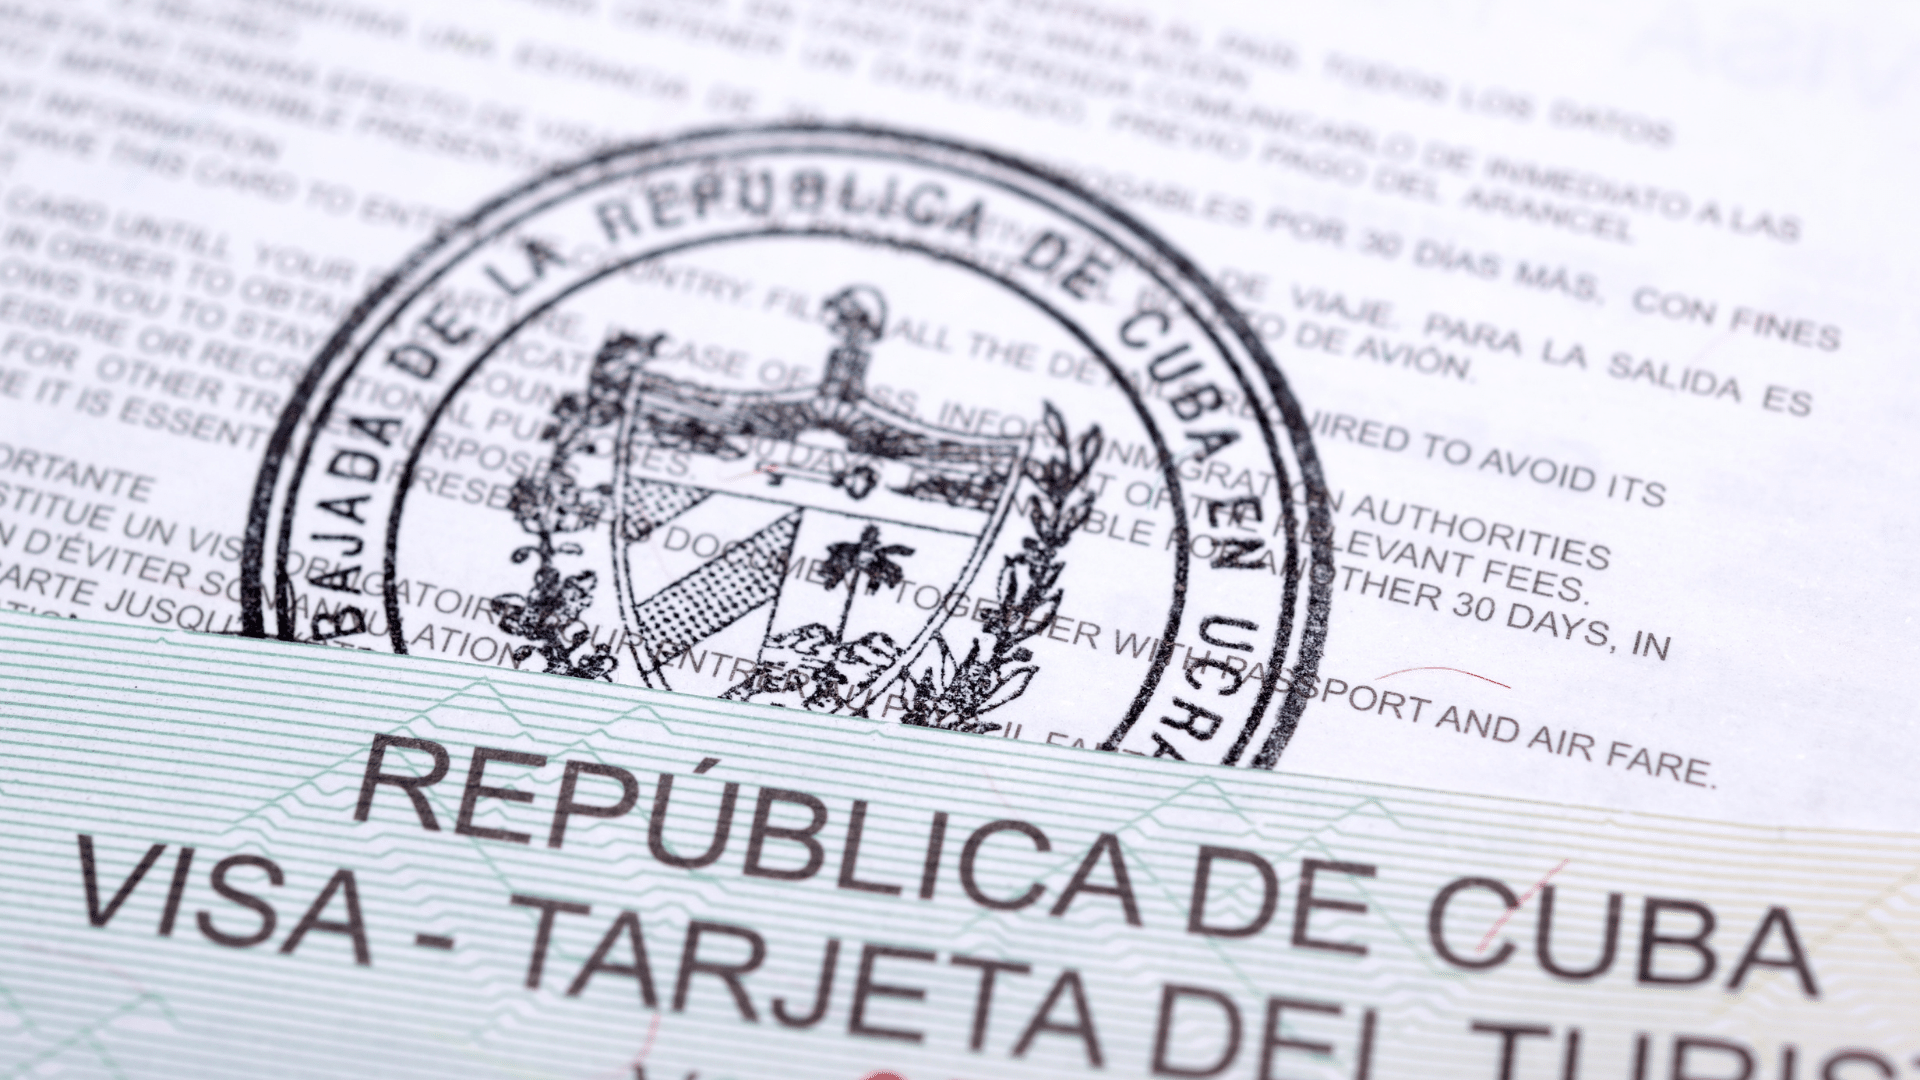 Important things to know before you visit Cuba - Tourist visa